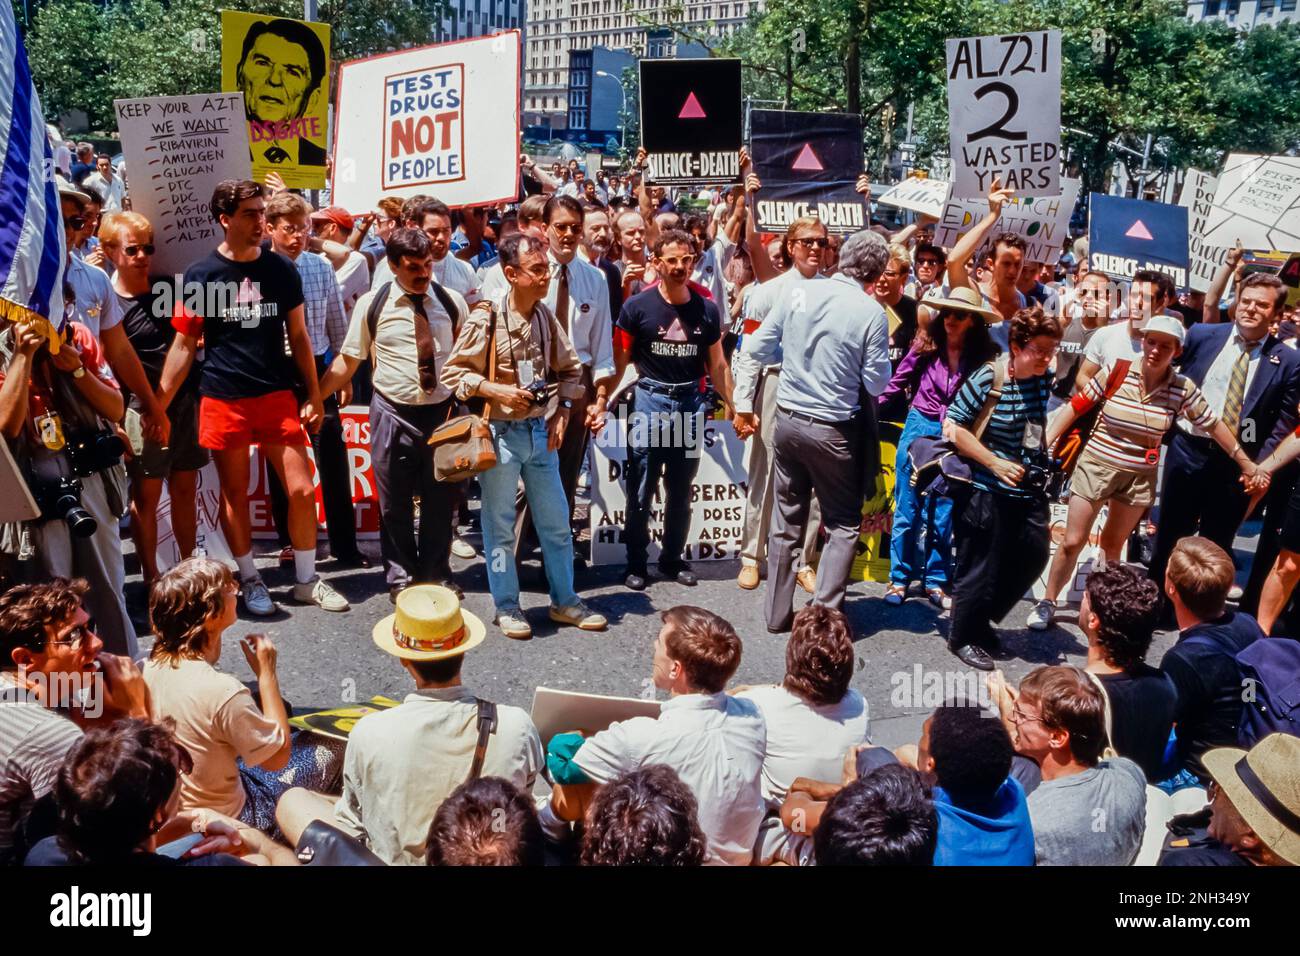 New York City, NY, USA, Large Crowd People, AIDS Activist Protest, Demonstration, Gay Pride, activists young Teens on Street, Act Up-New York, Sitting Down, Holding Signs, Archive Photo, 1980s new york Stock Photo